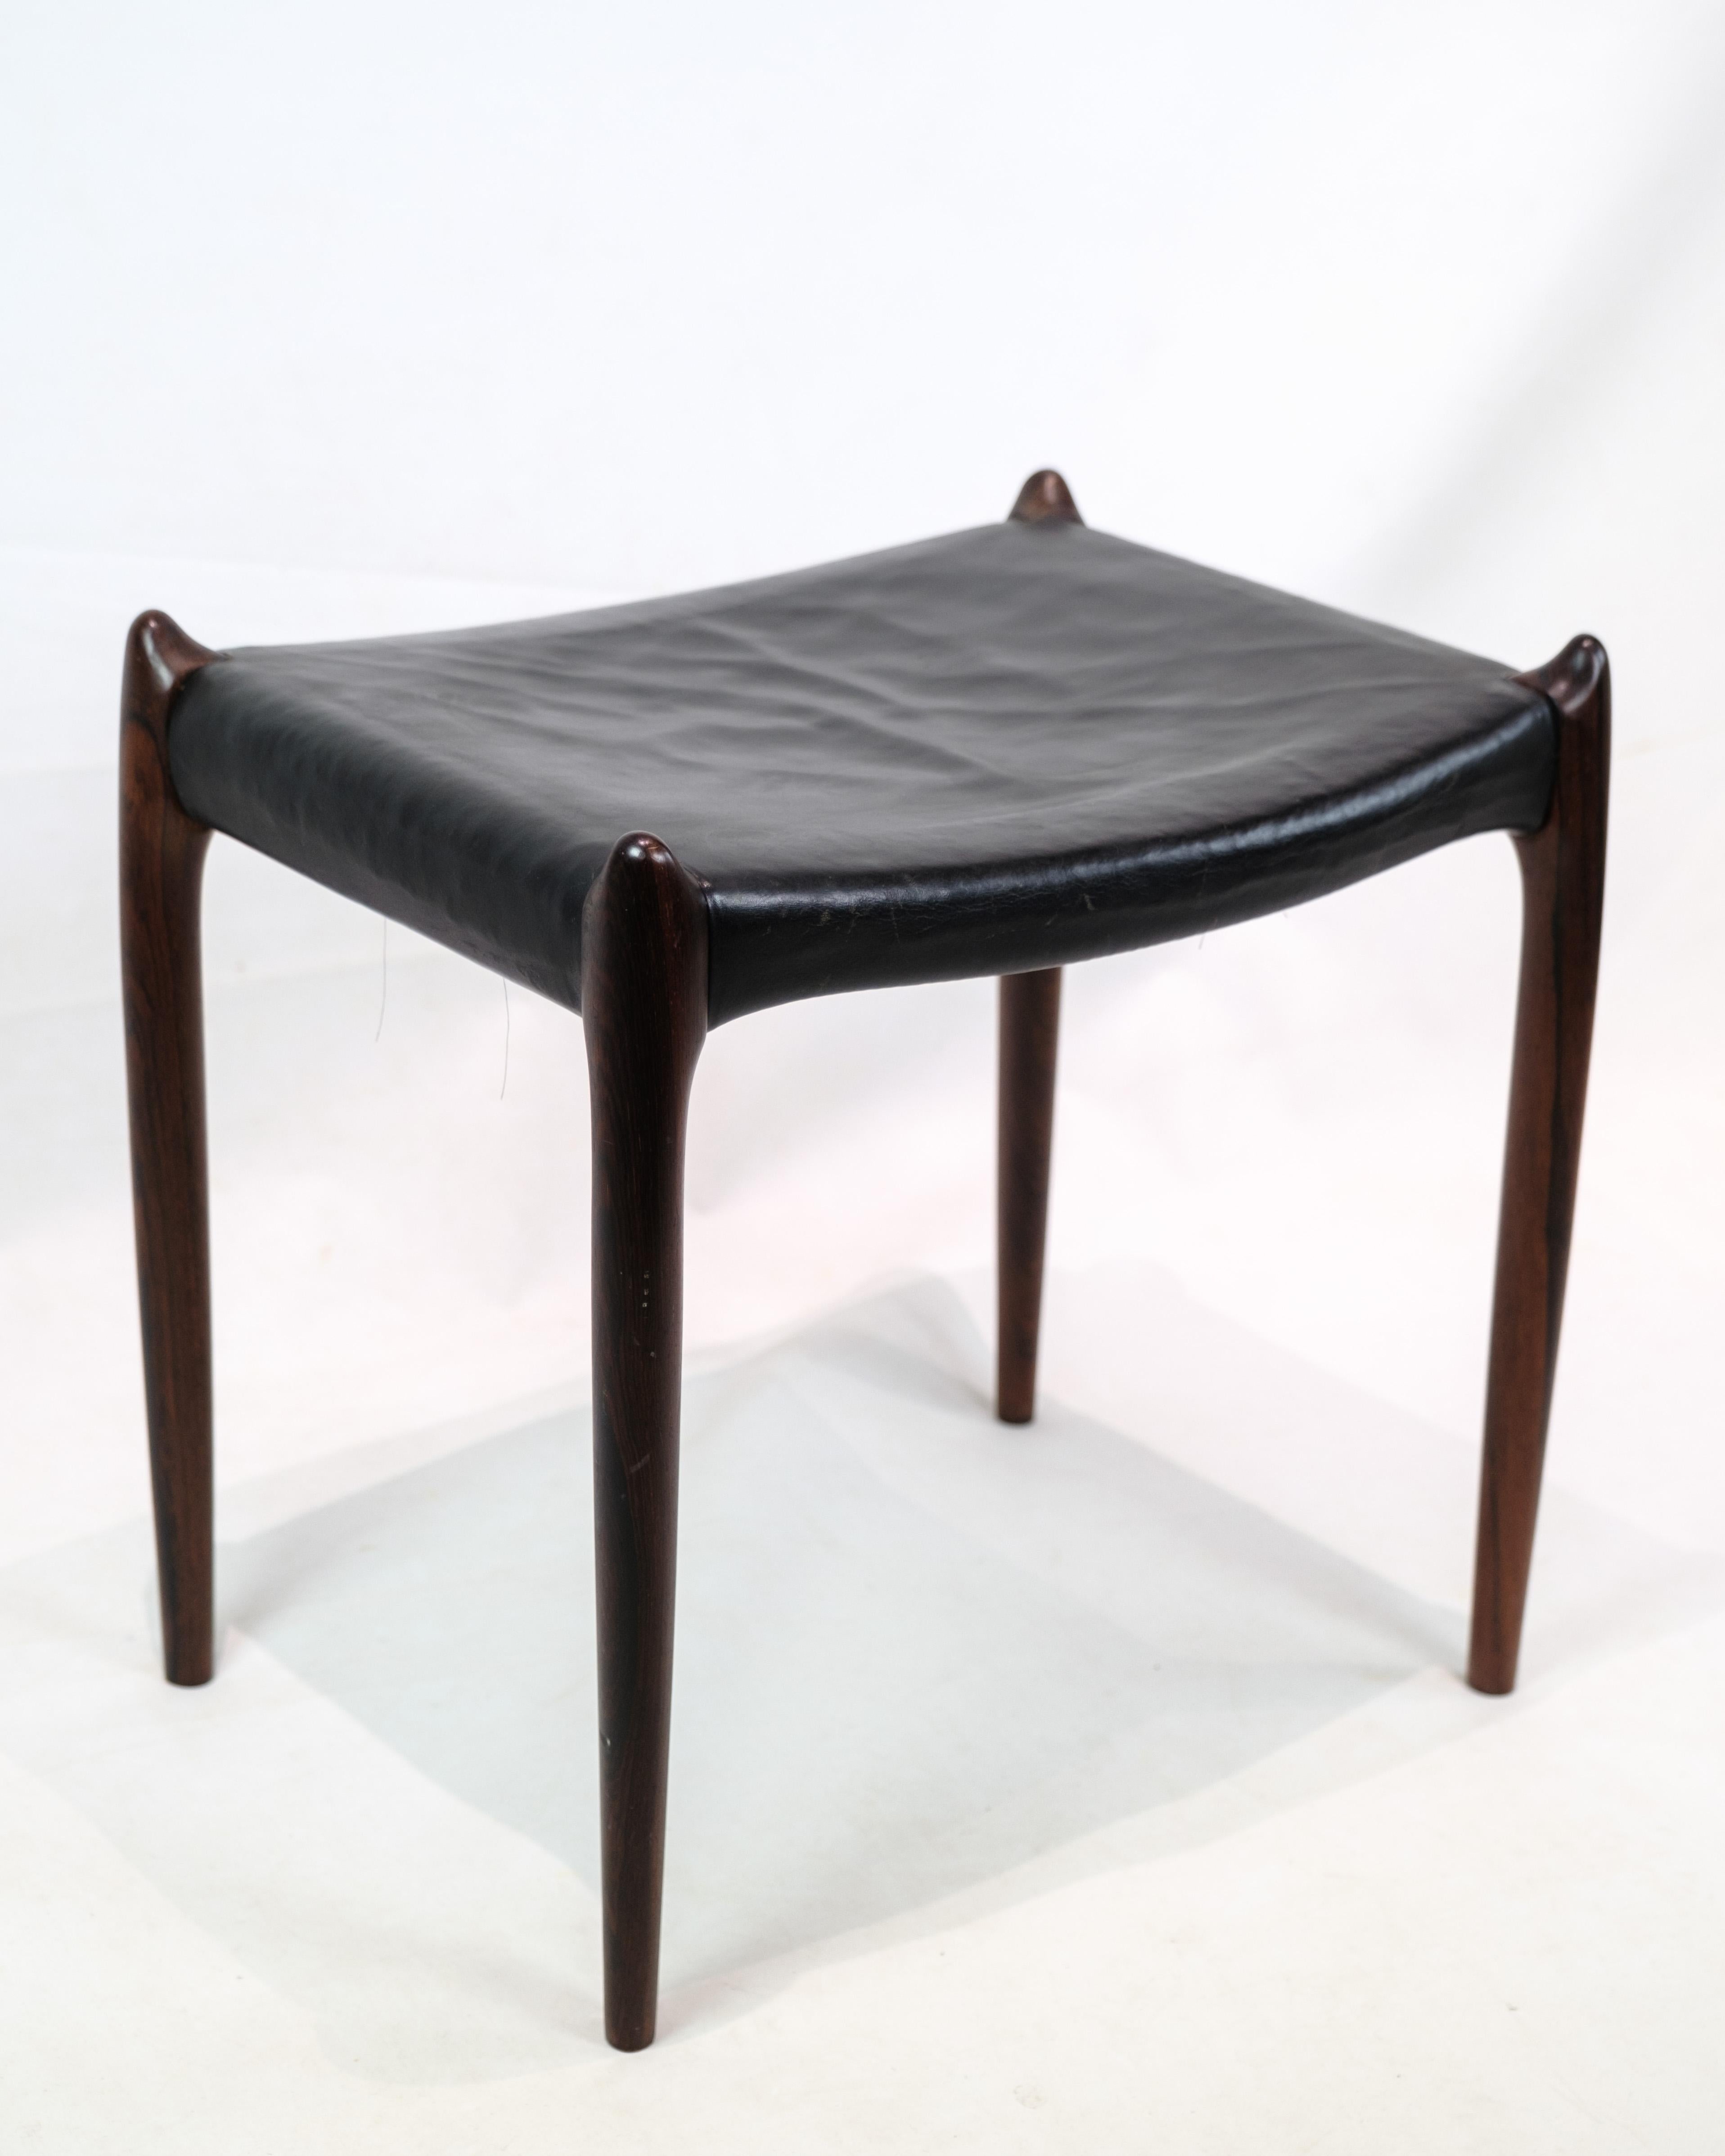 This stool is a Model 78a made of rosewood with black leather, designed by Niels O. Møller for J.L. Møller's Møbelfabrik in 1950. It has a simple and functional design, typical of Møller's work, and combines the warmth of the rosewood with the